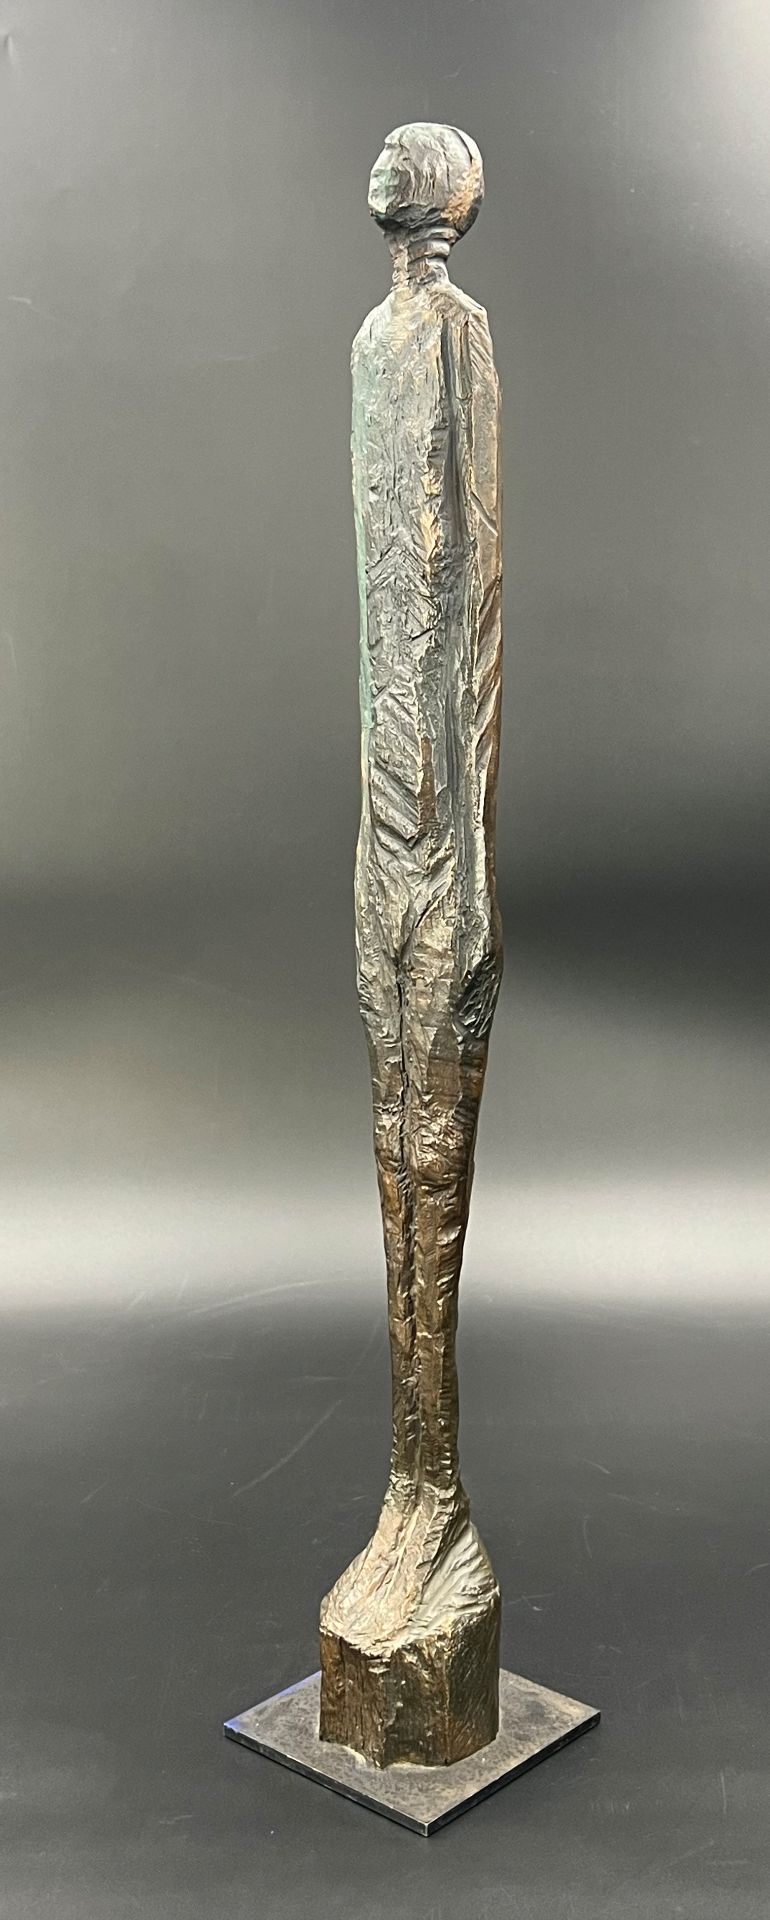 Walter SCHEMBS (1956). Bronze. "Small stele". - Image 2 of 10